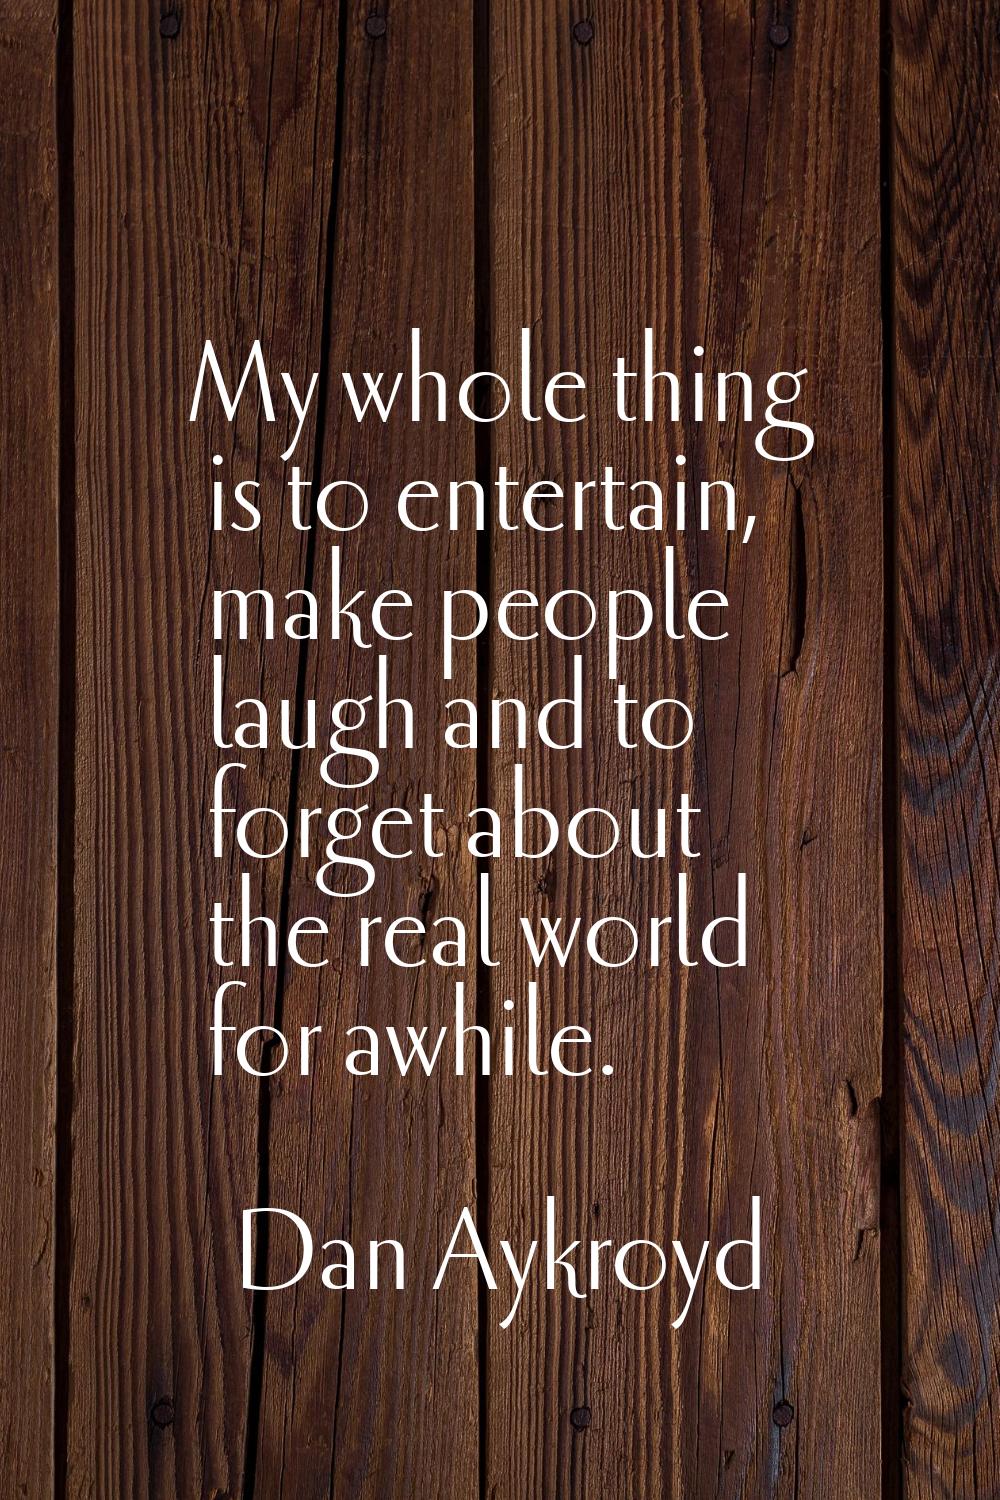 My whole thing is to entertain, make people laugh and to forget about the real world for awhile.